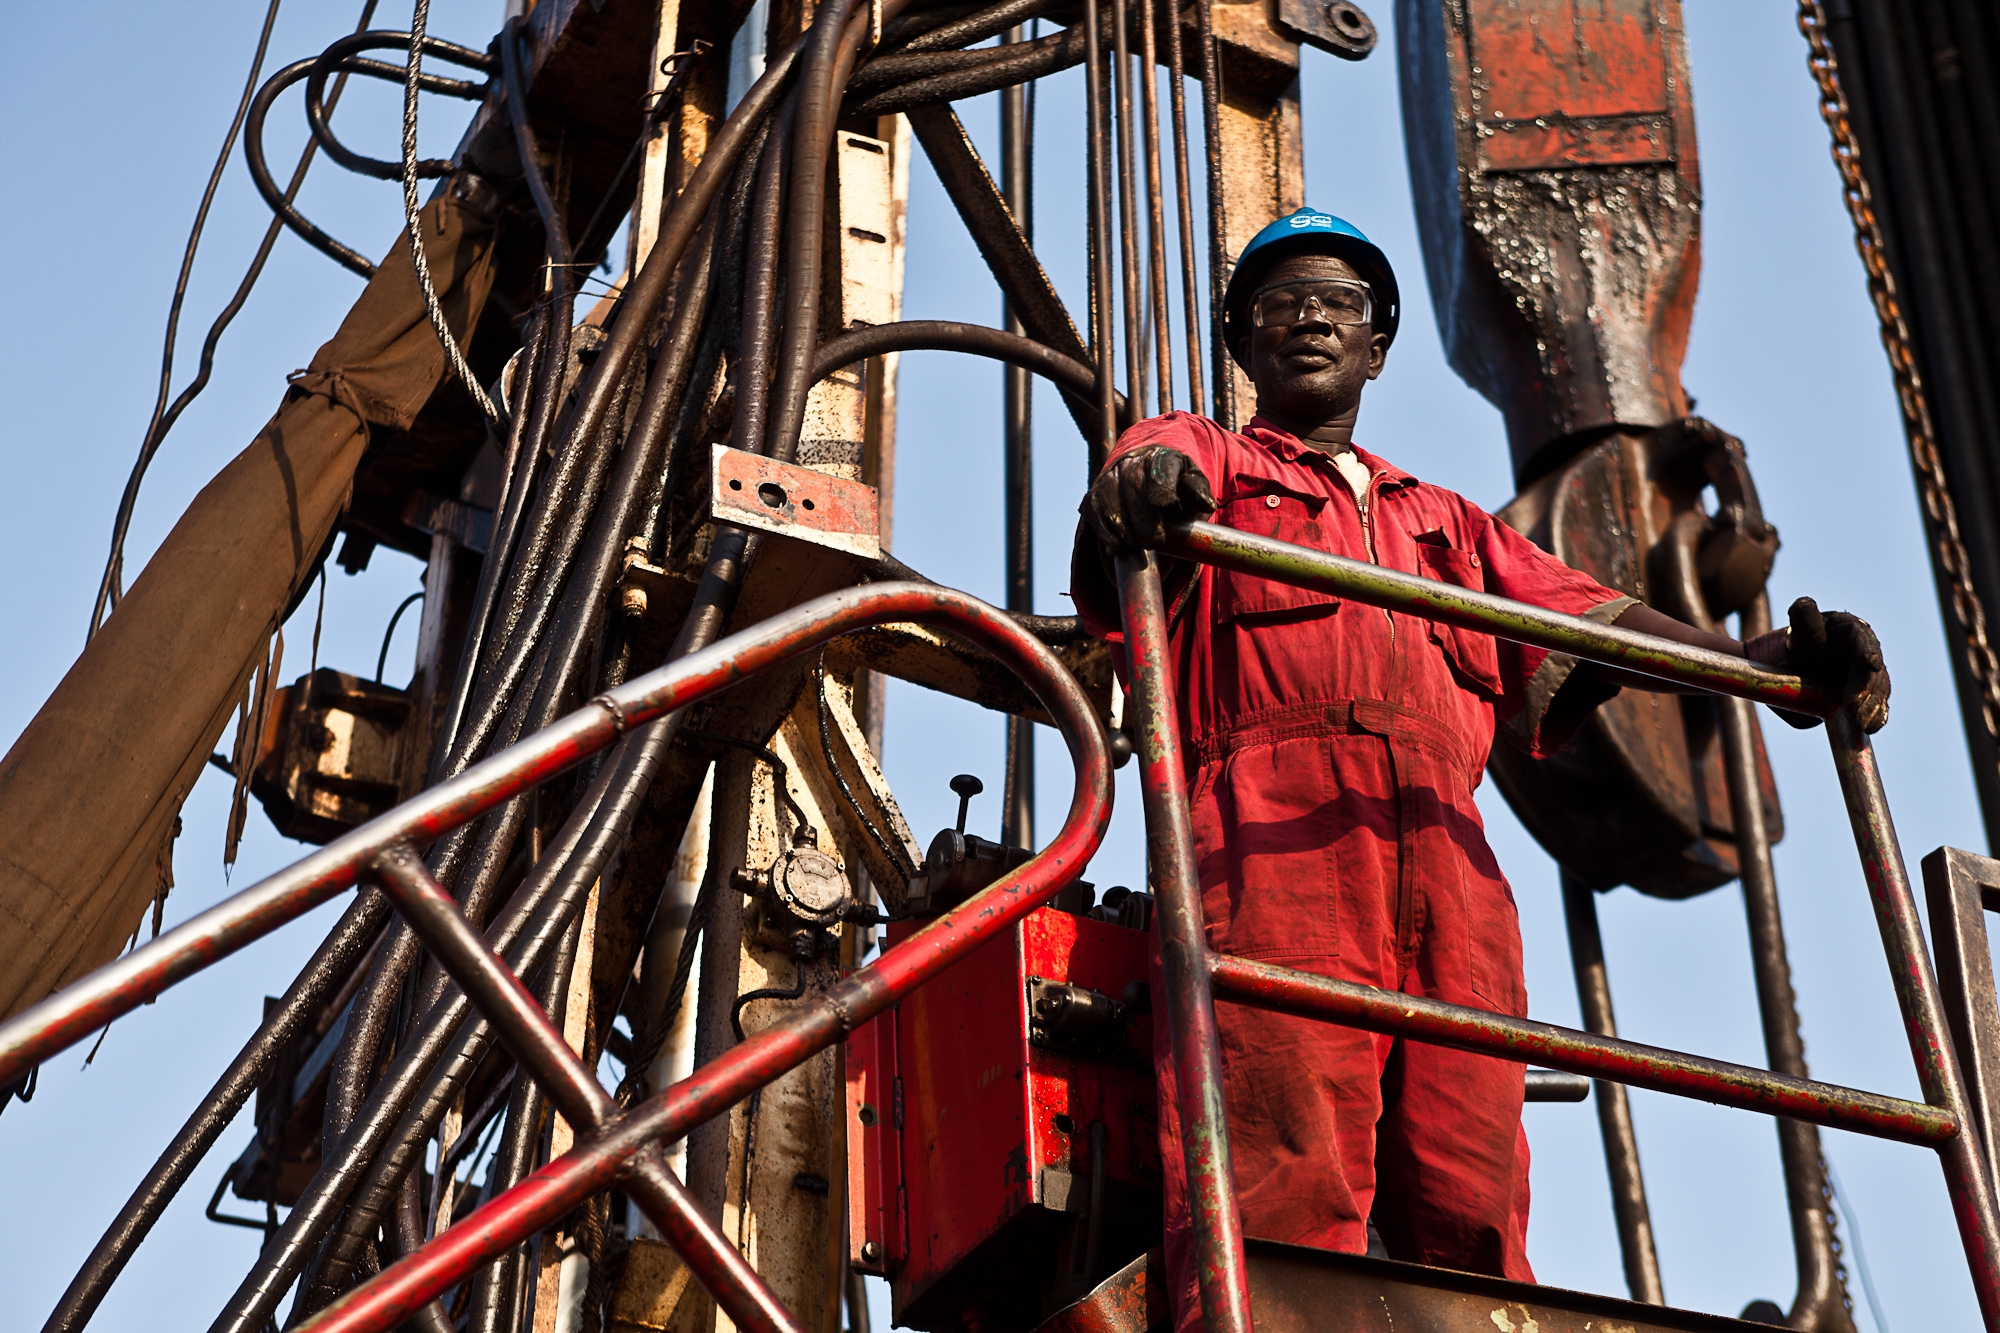 Oil worker in Unity State, South Sudan